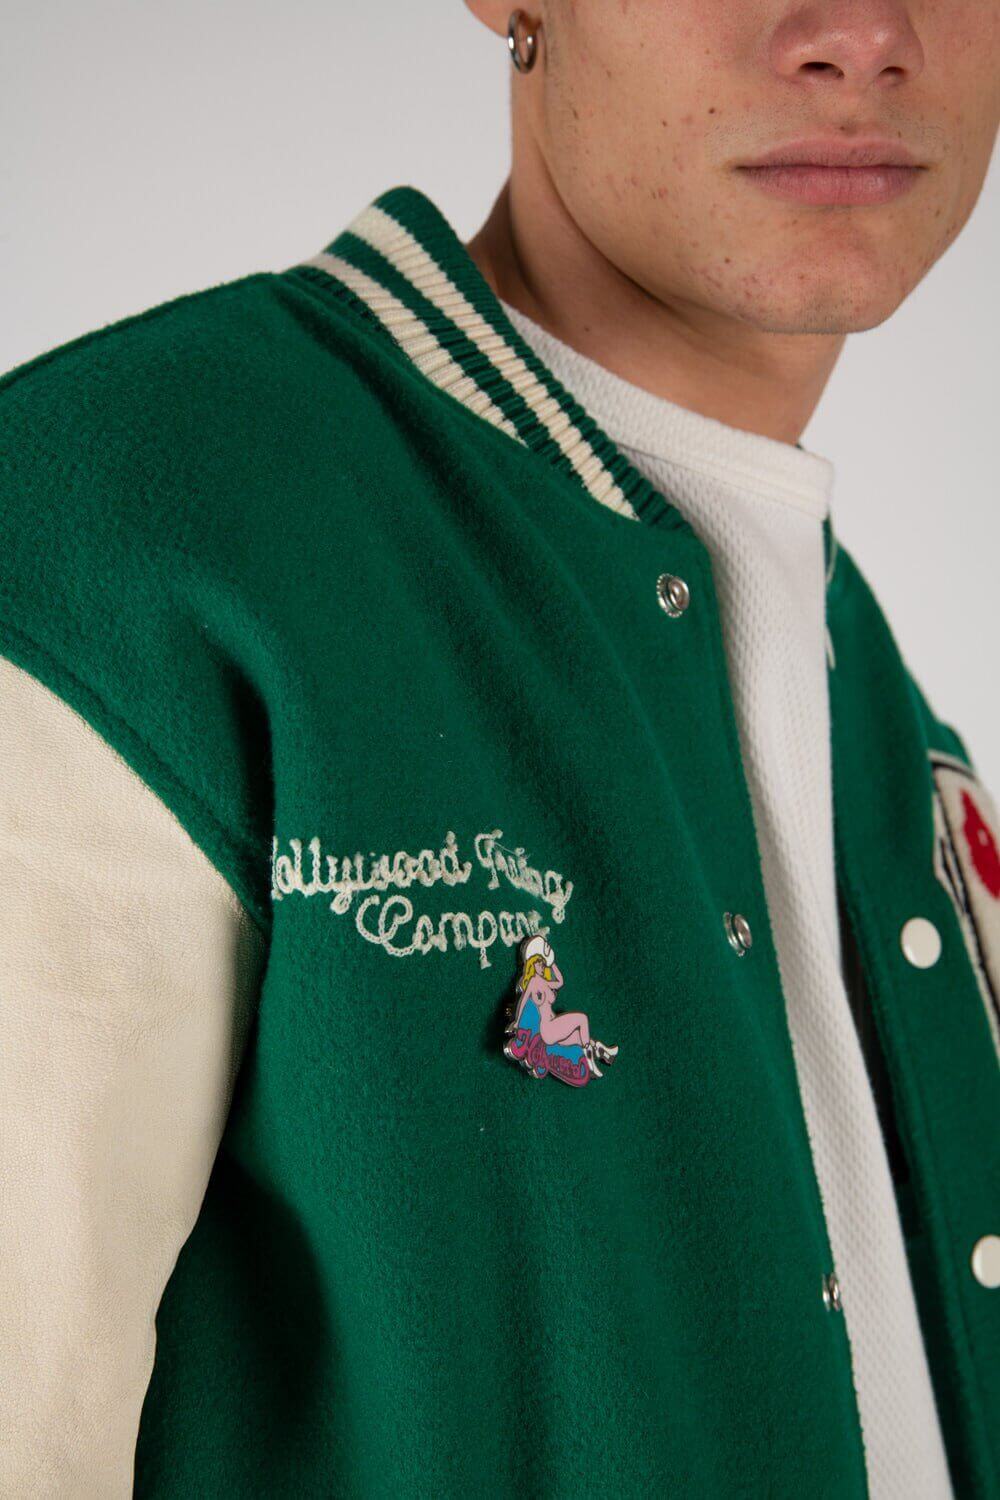 COLLEGE - CARDS Varsity wool & leather bomber jacket. Front button closure, ribbed collar, cuffs and hem. Embroidered details and patches. Two side pockets. Main body composition: 70% Wool, 30% Acrylic; sleeves: 100% Leather HTC LOS ANGELES